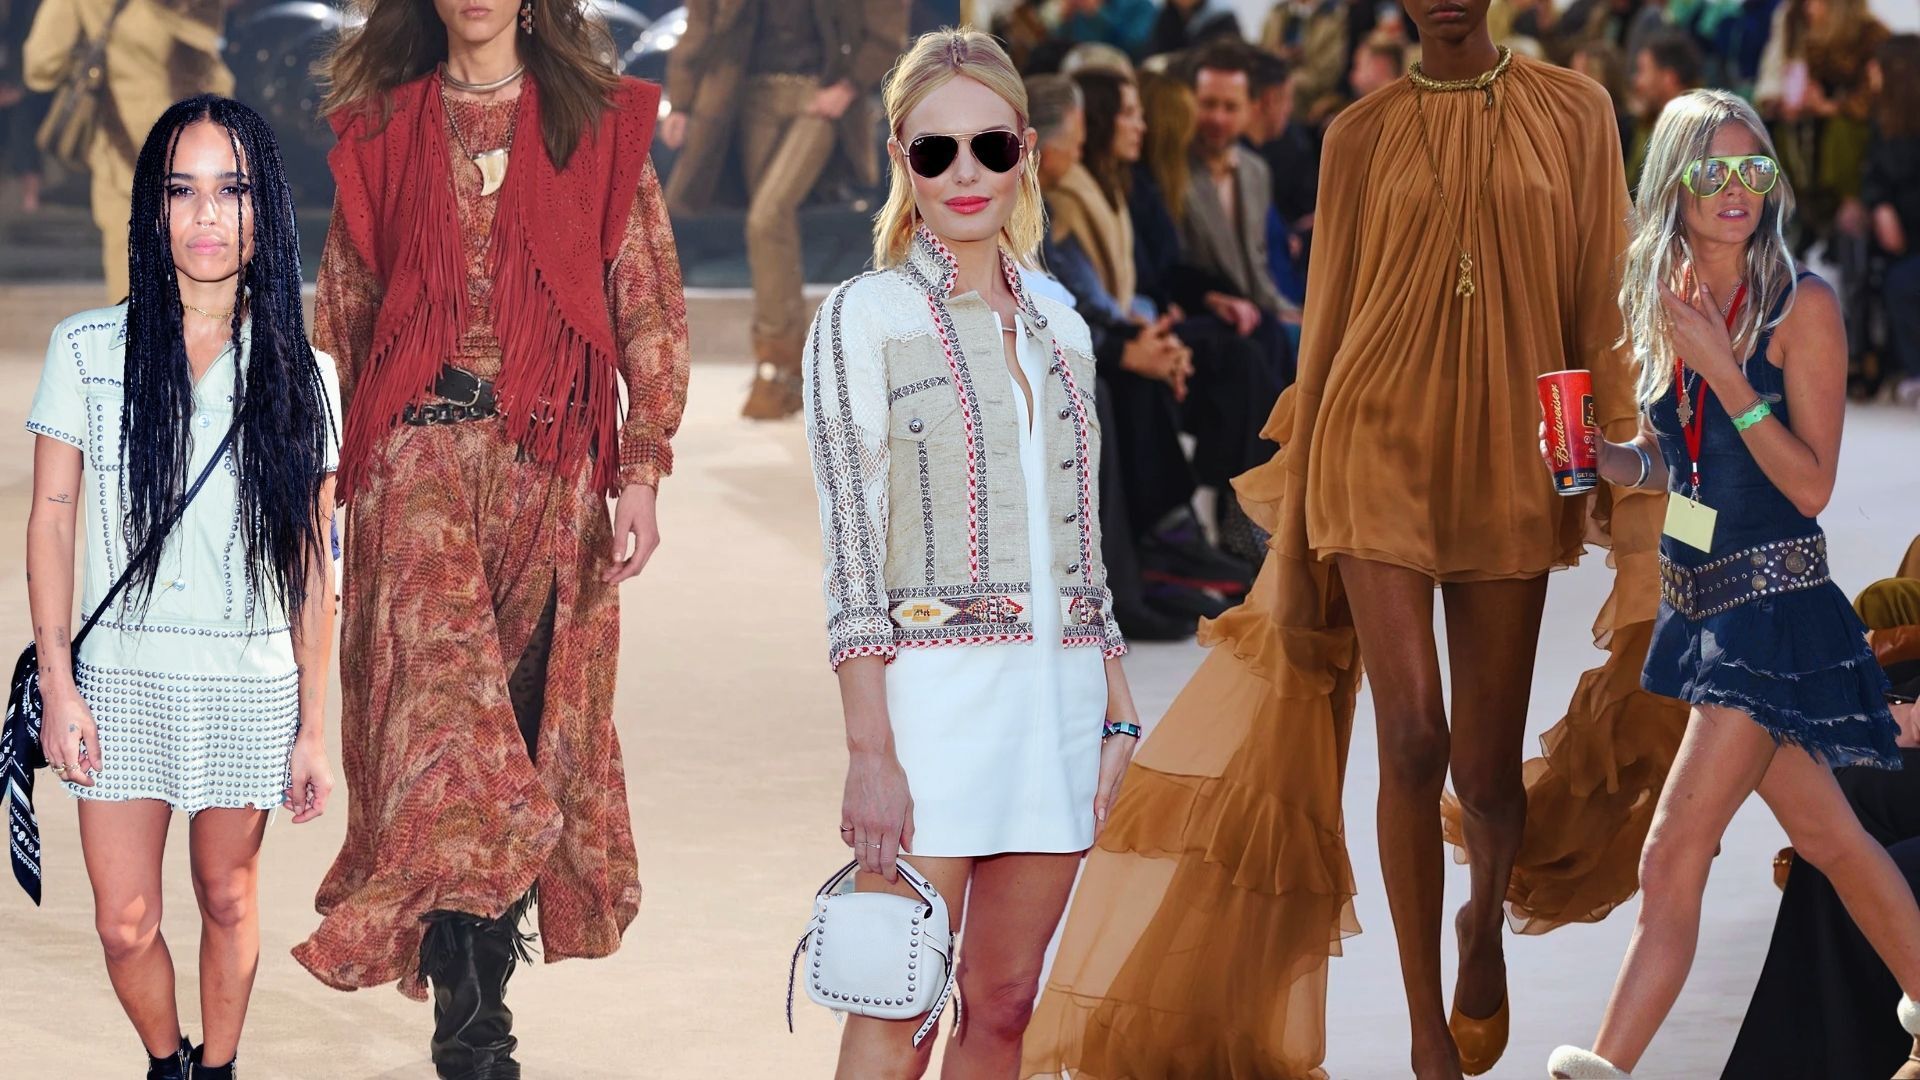 Boho style makes a comeback: 15 pieces to add to your wardrobe now